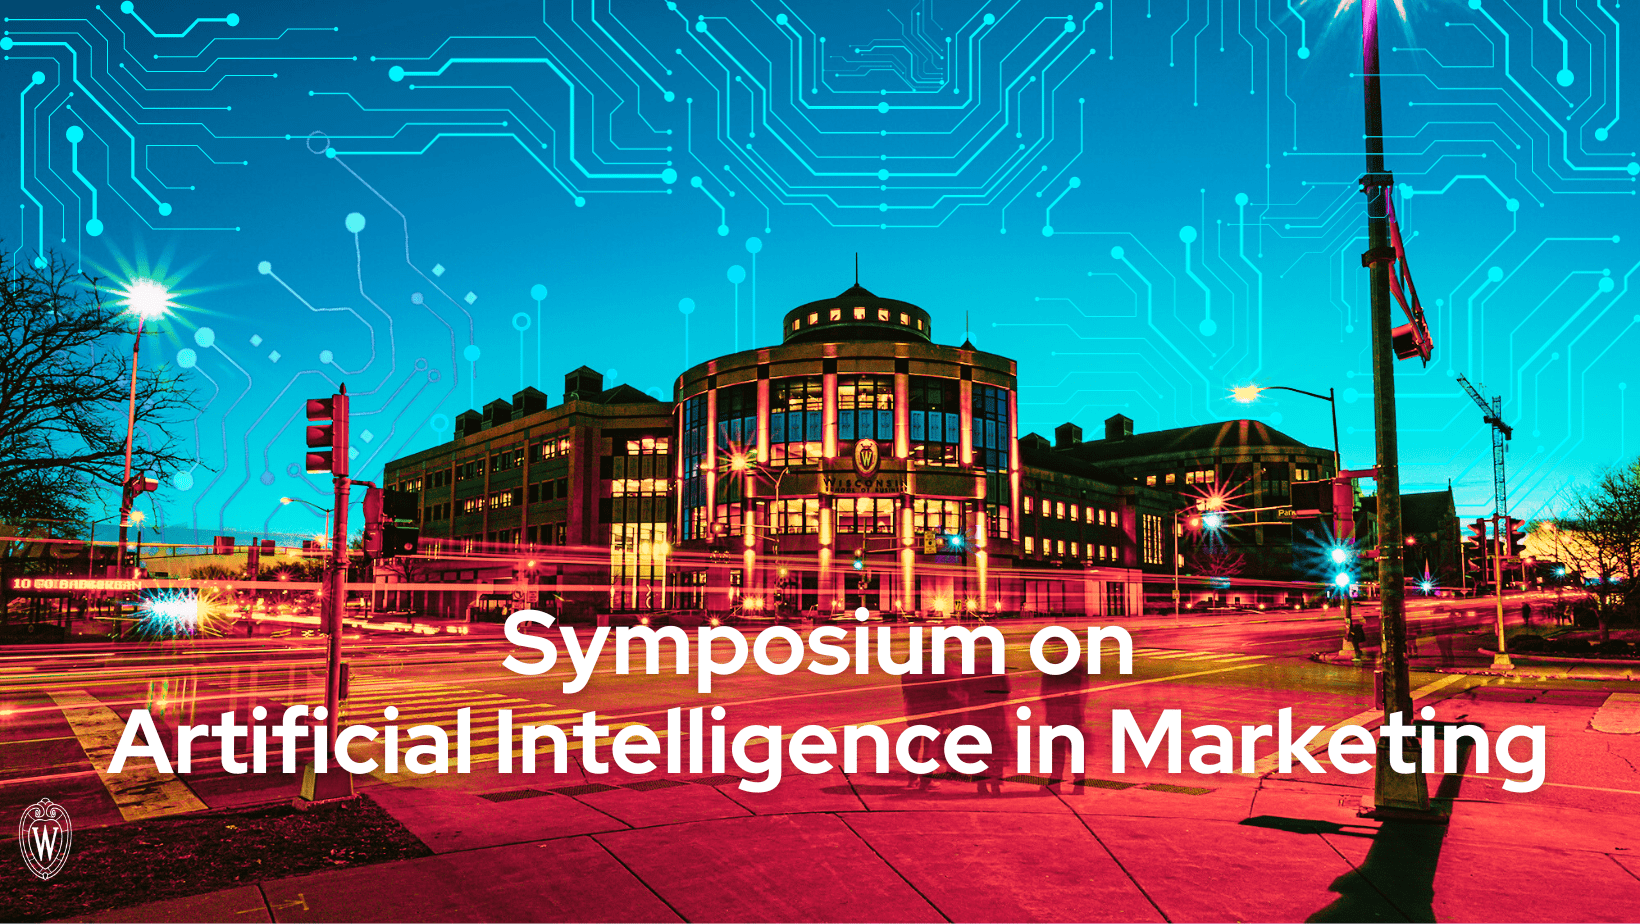 Symposium on Artificial Intelligence in Marketing Header Image